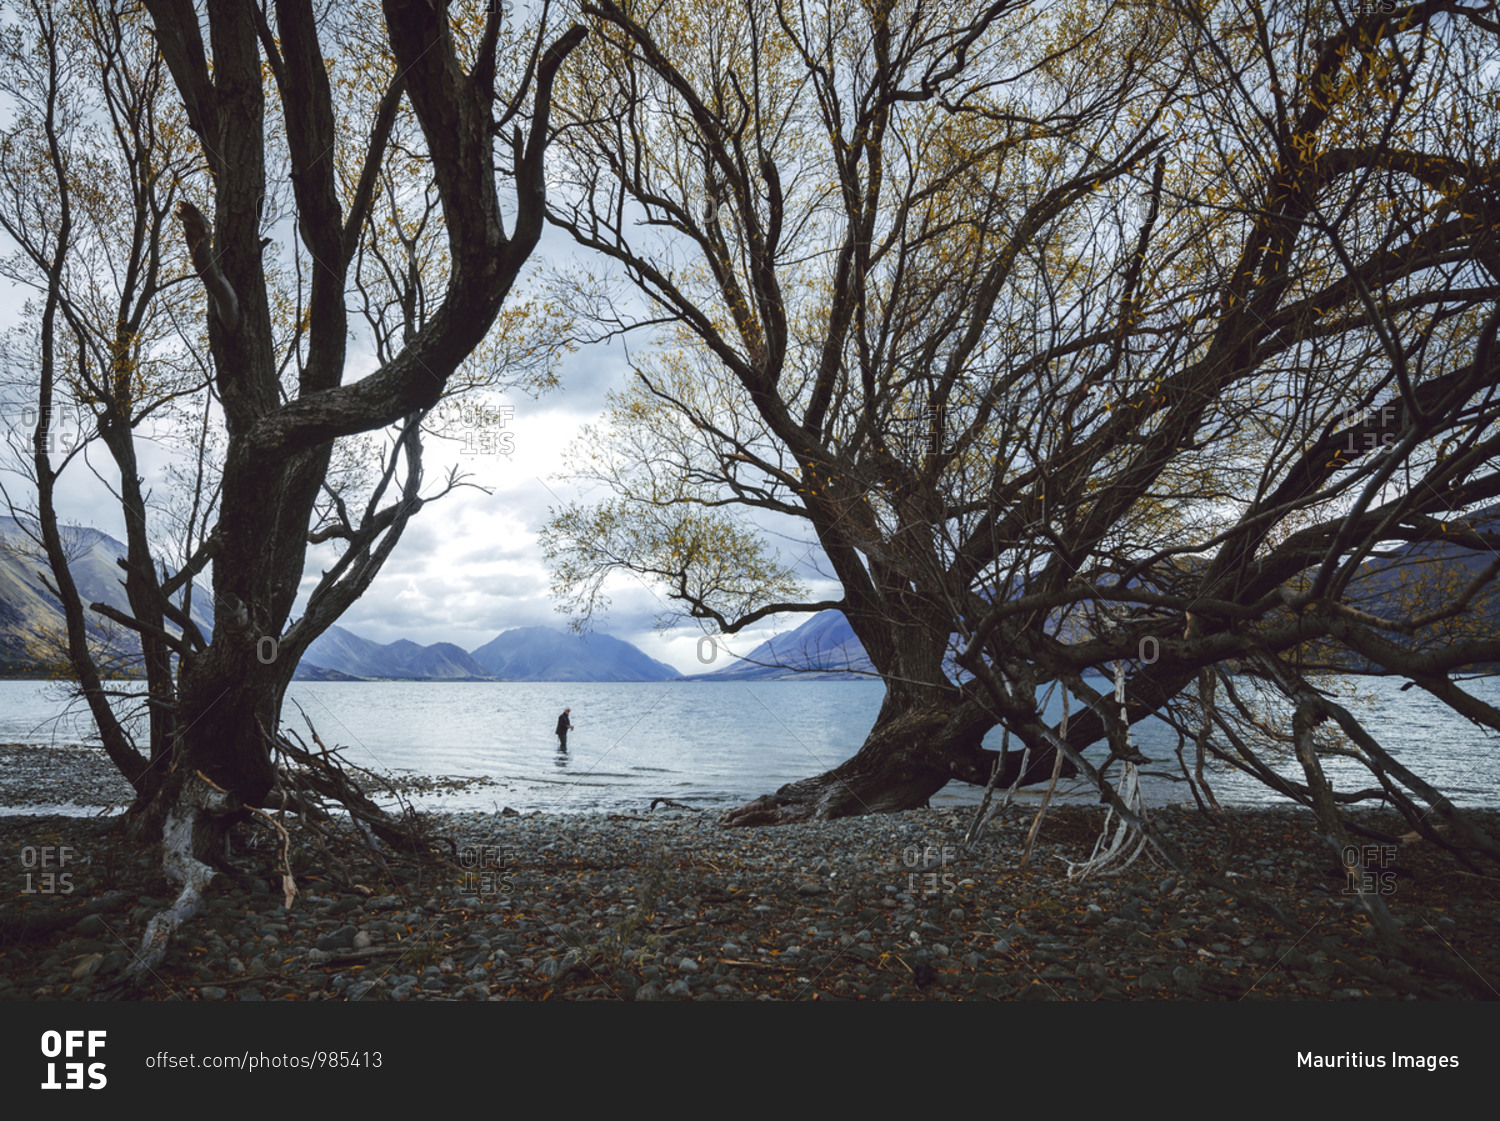 Angler on Lake Ohau framed by two trees with mountains in the background, Lake Ohau, Canterbury, New Zealand